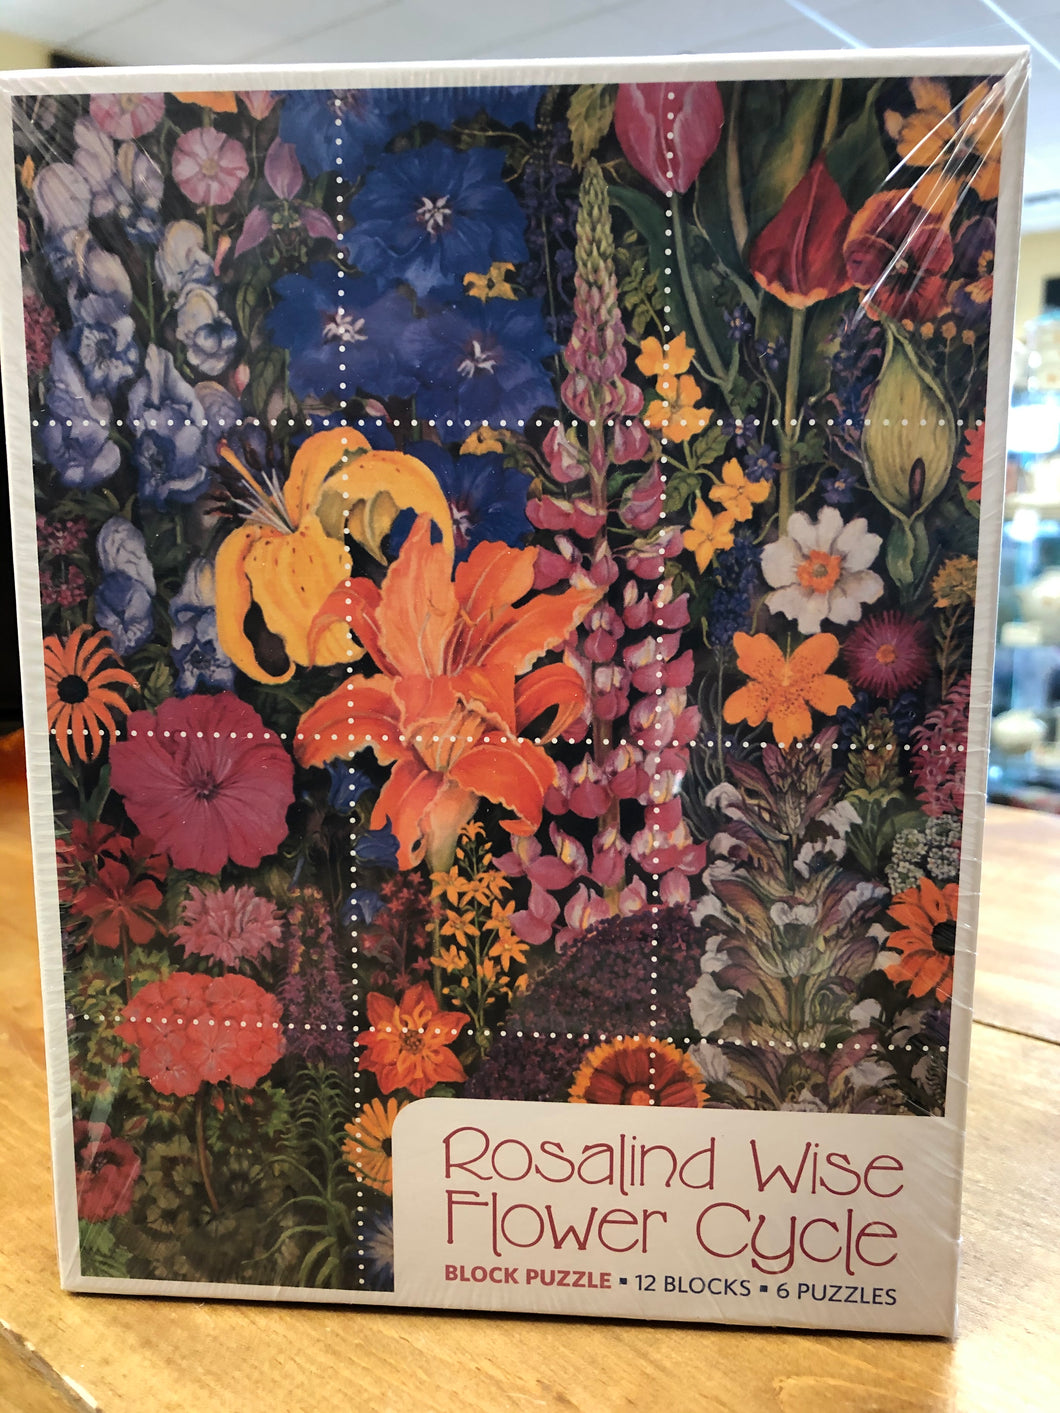 Rosalind Wise Flower Cycle Block Puzzle